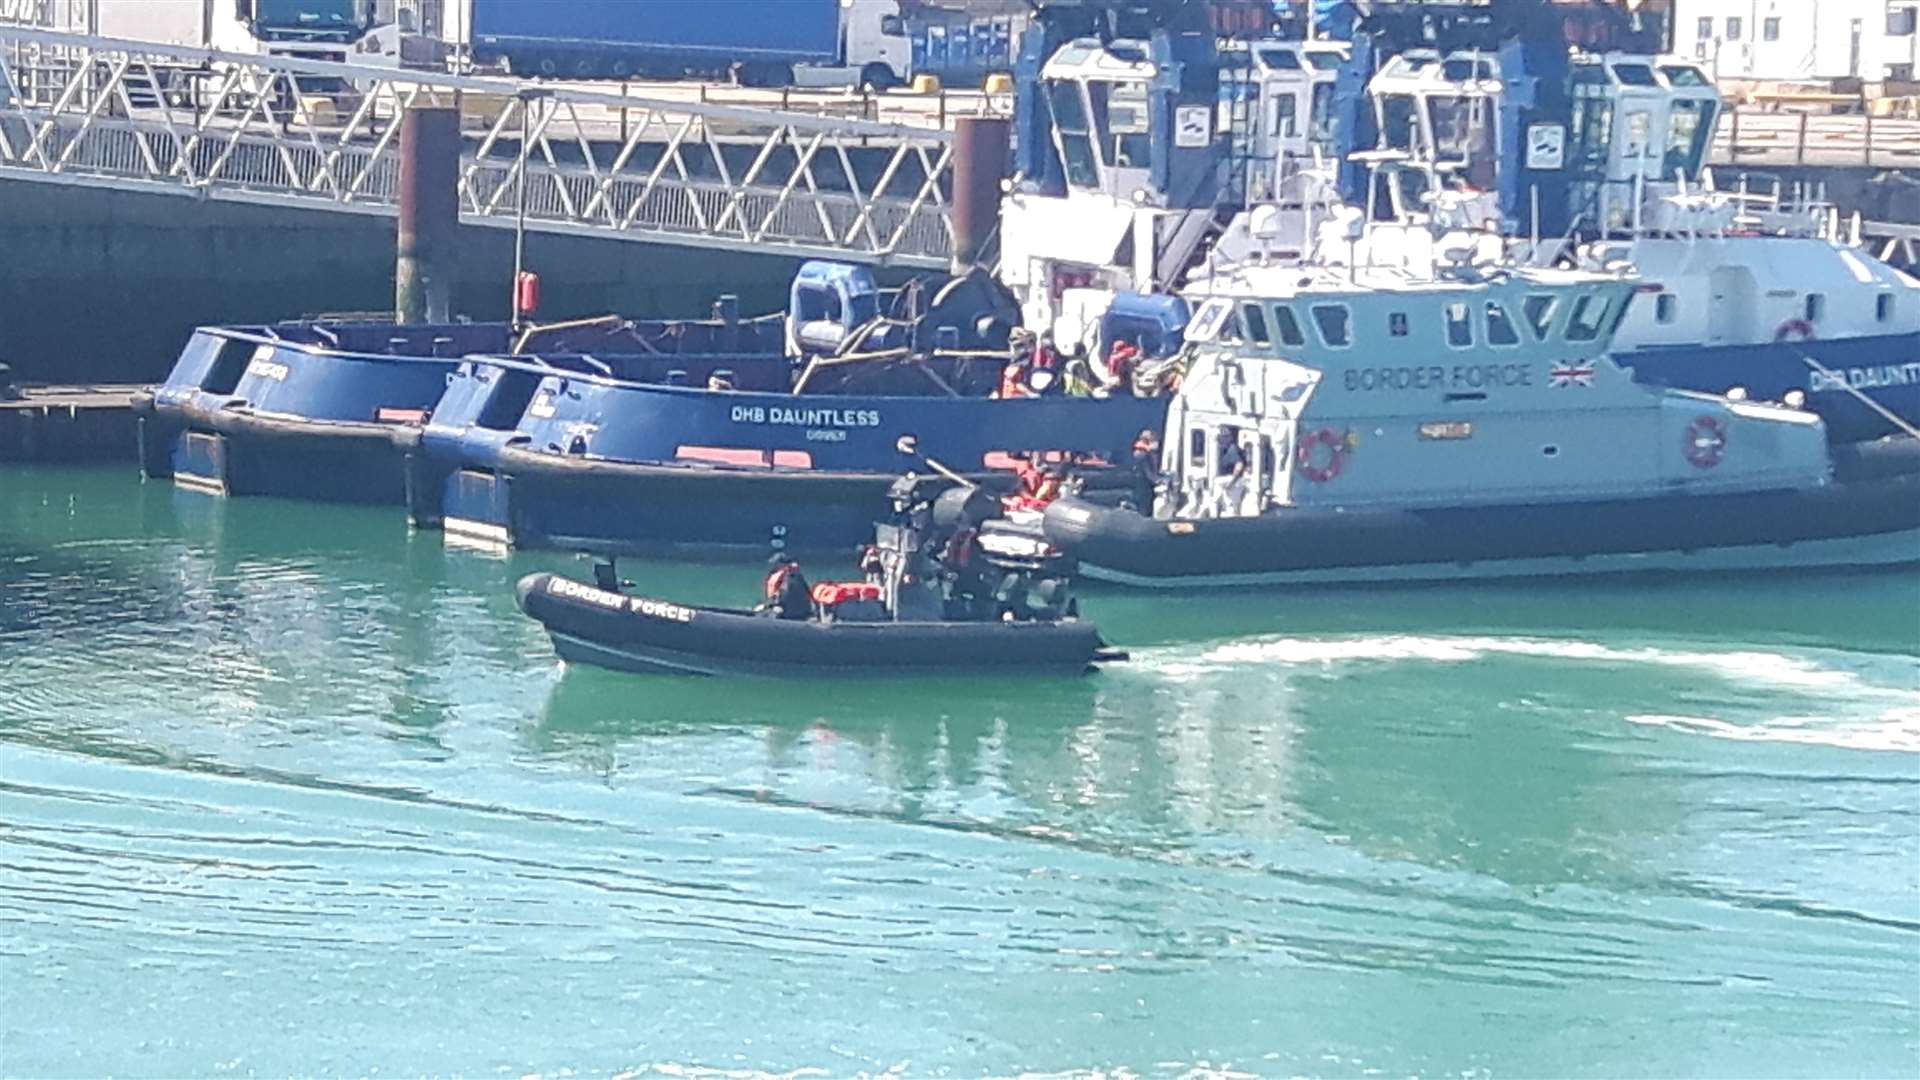 Border Force teams have been patrolling the Channel